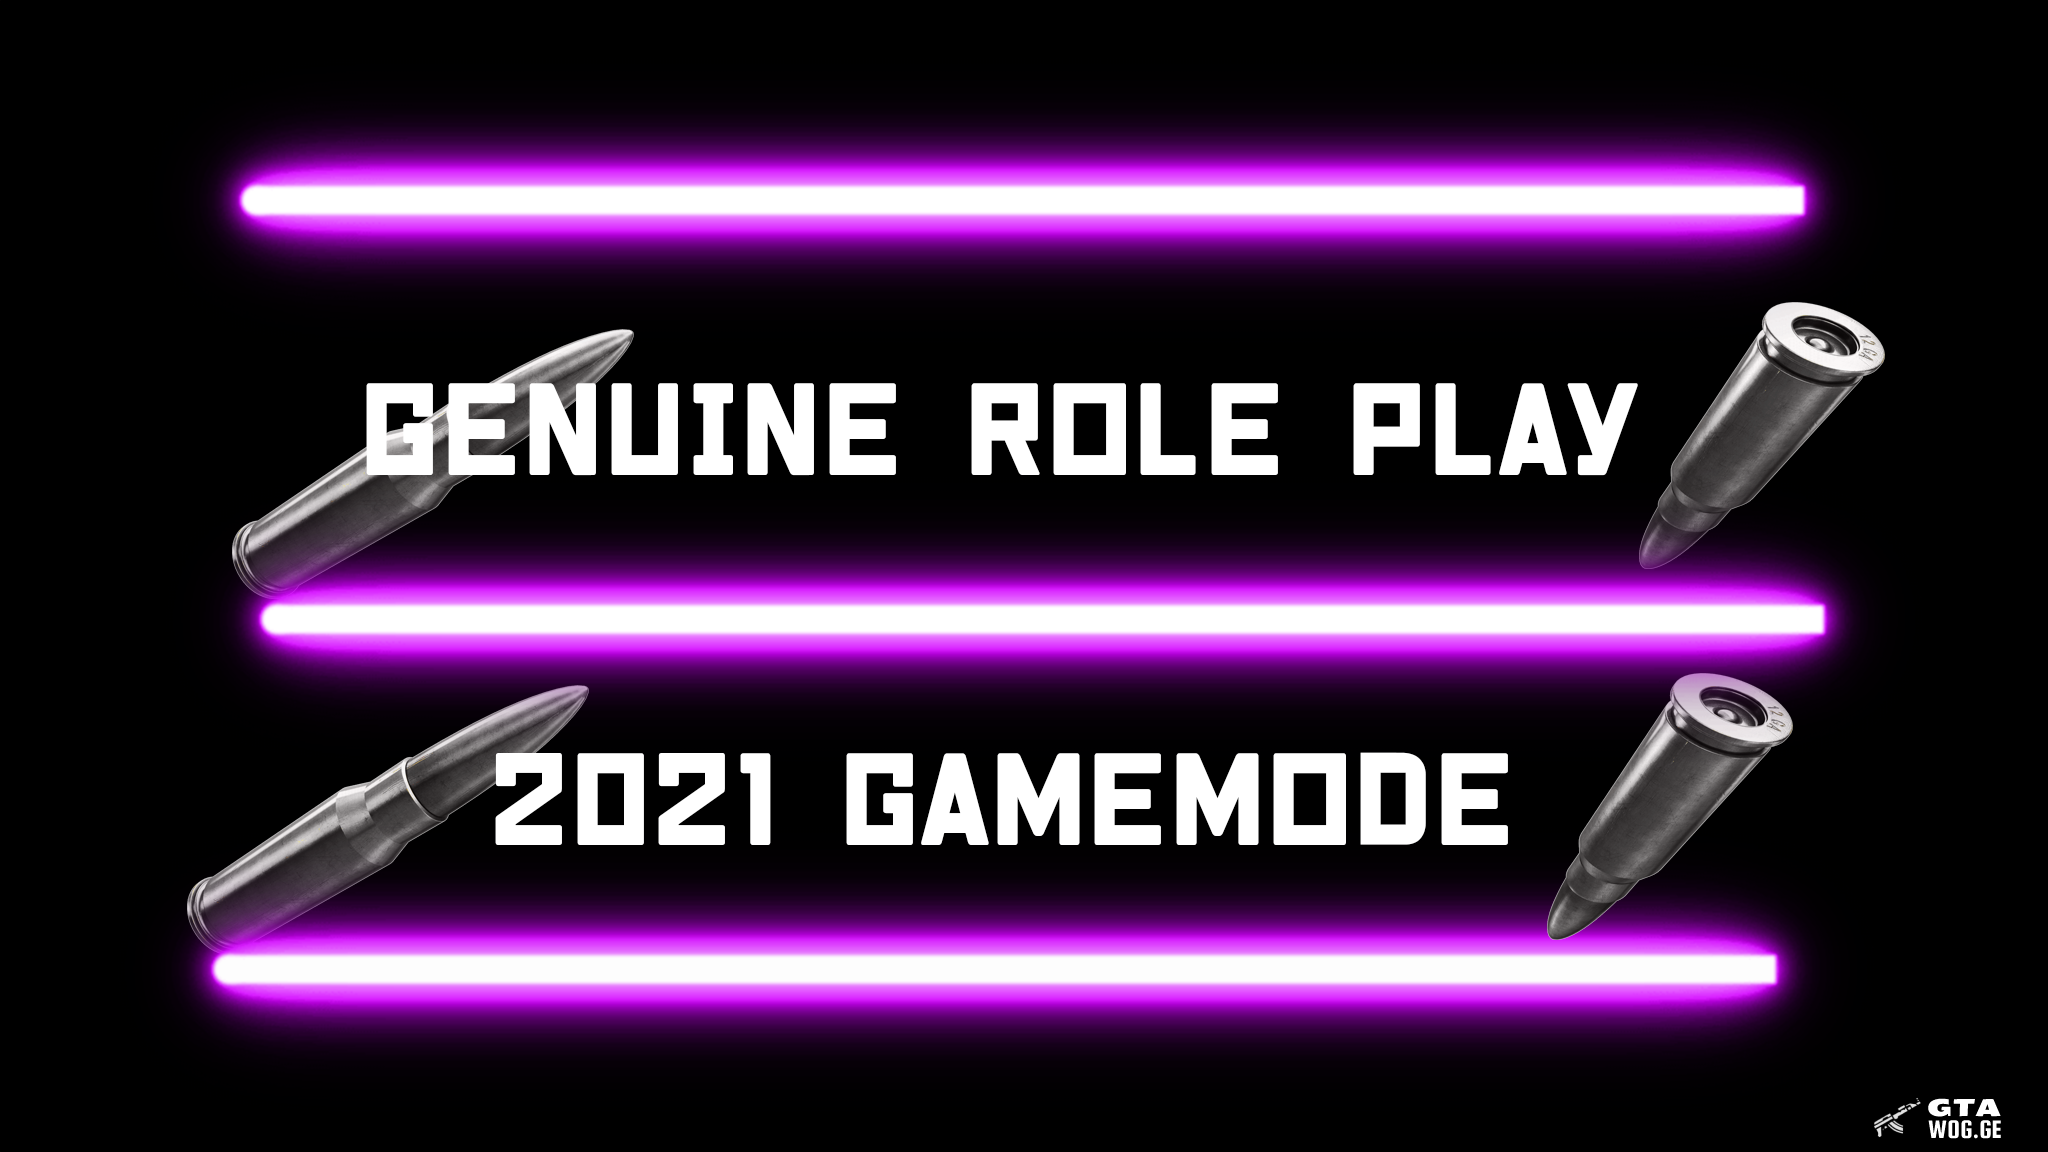 [Gamemode] Genuine Role Play 2021 😮